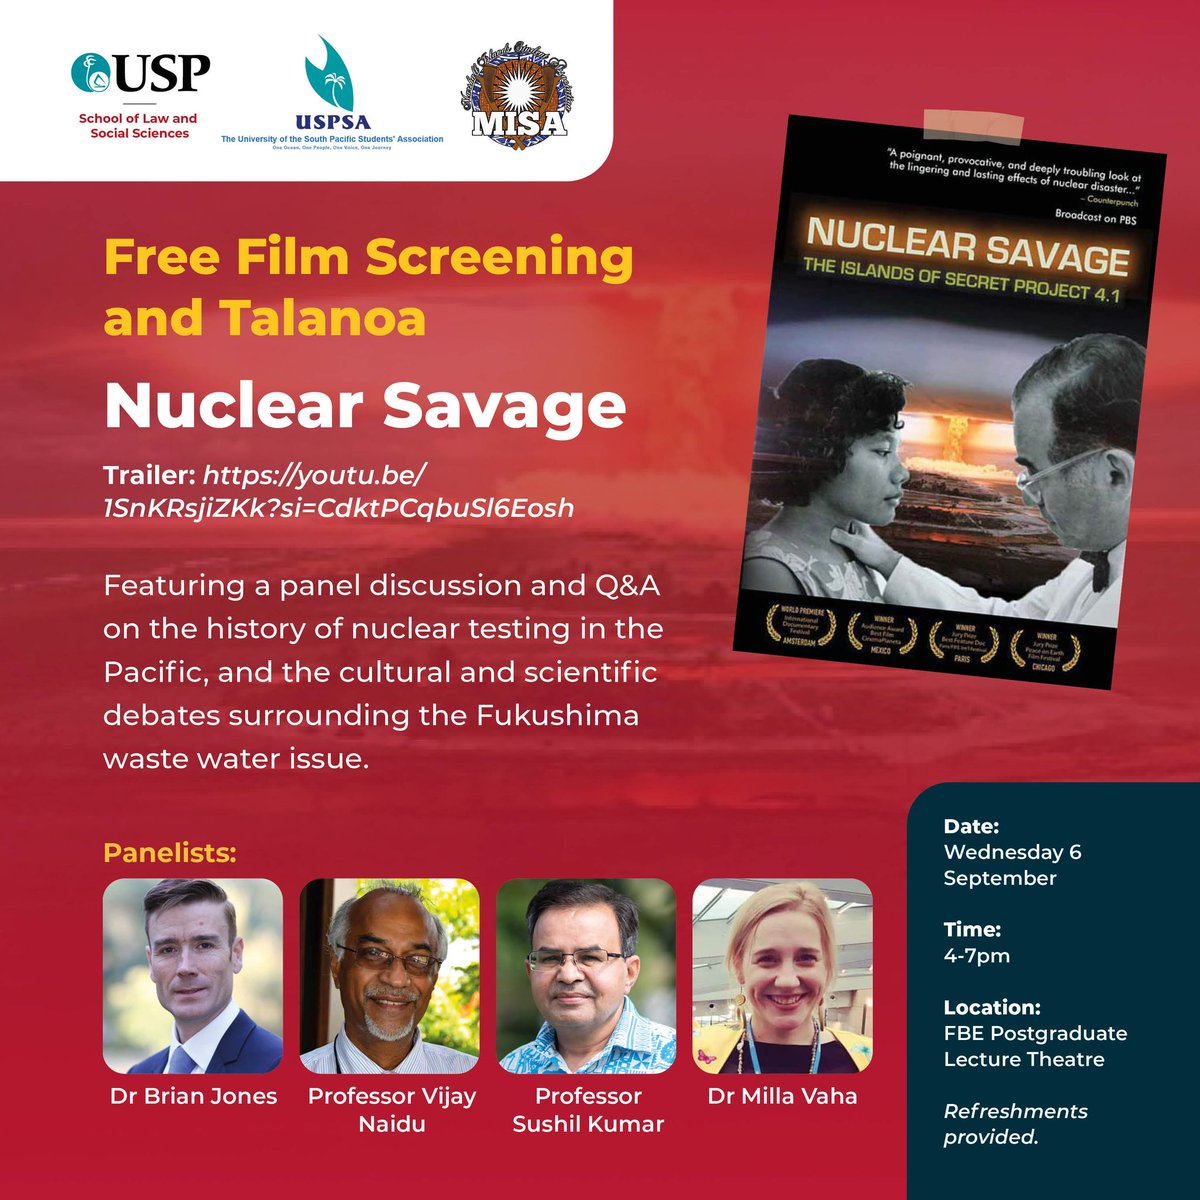 Join the USP School of Law & Social Sciences, Student Association & @misa4thepacific for the screening of #NuclearSavage. The event will include a panel discussion on nuclear testing in the #Pacific, and the recent Fukushima development. Refer to flyer for details 👇🏿👇🏿